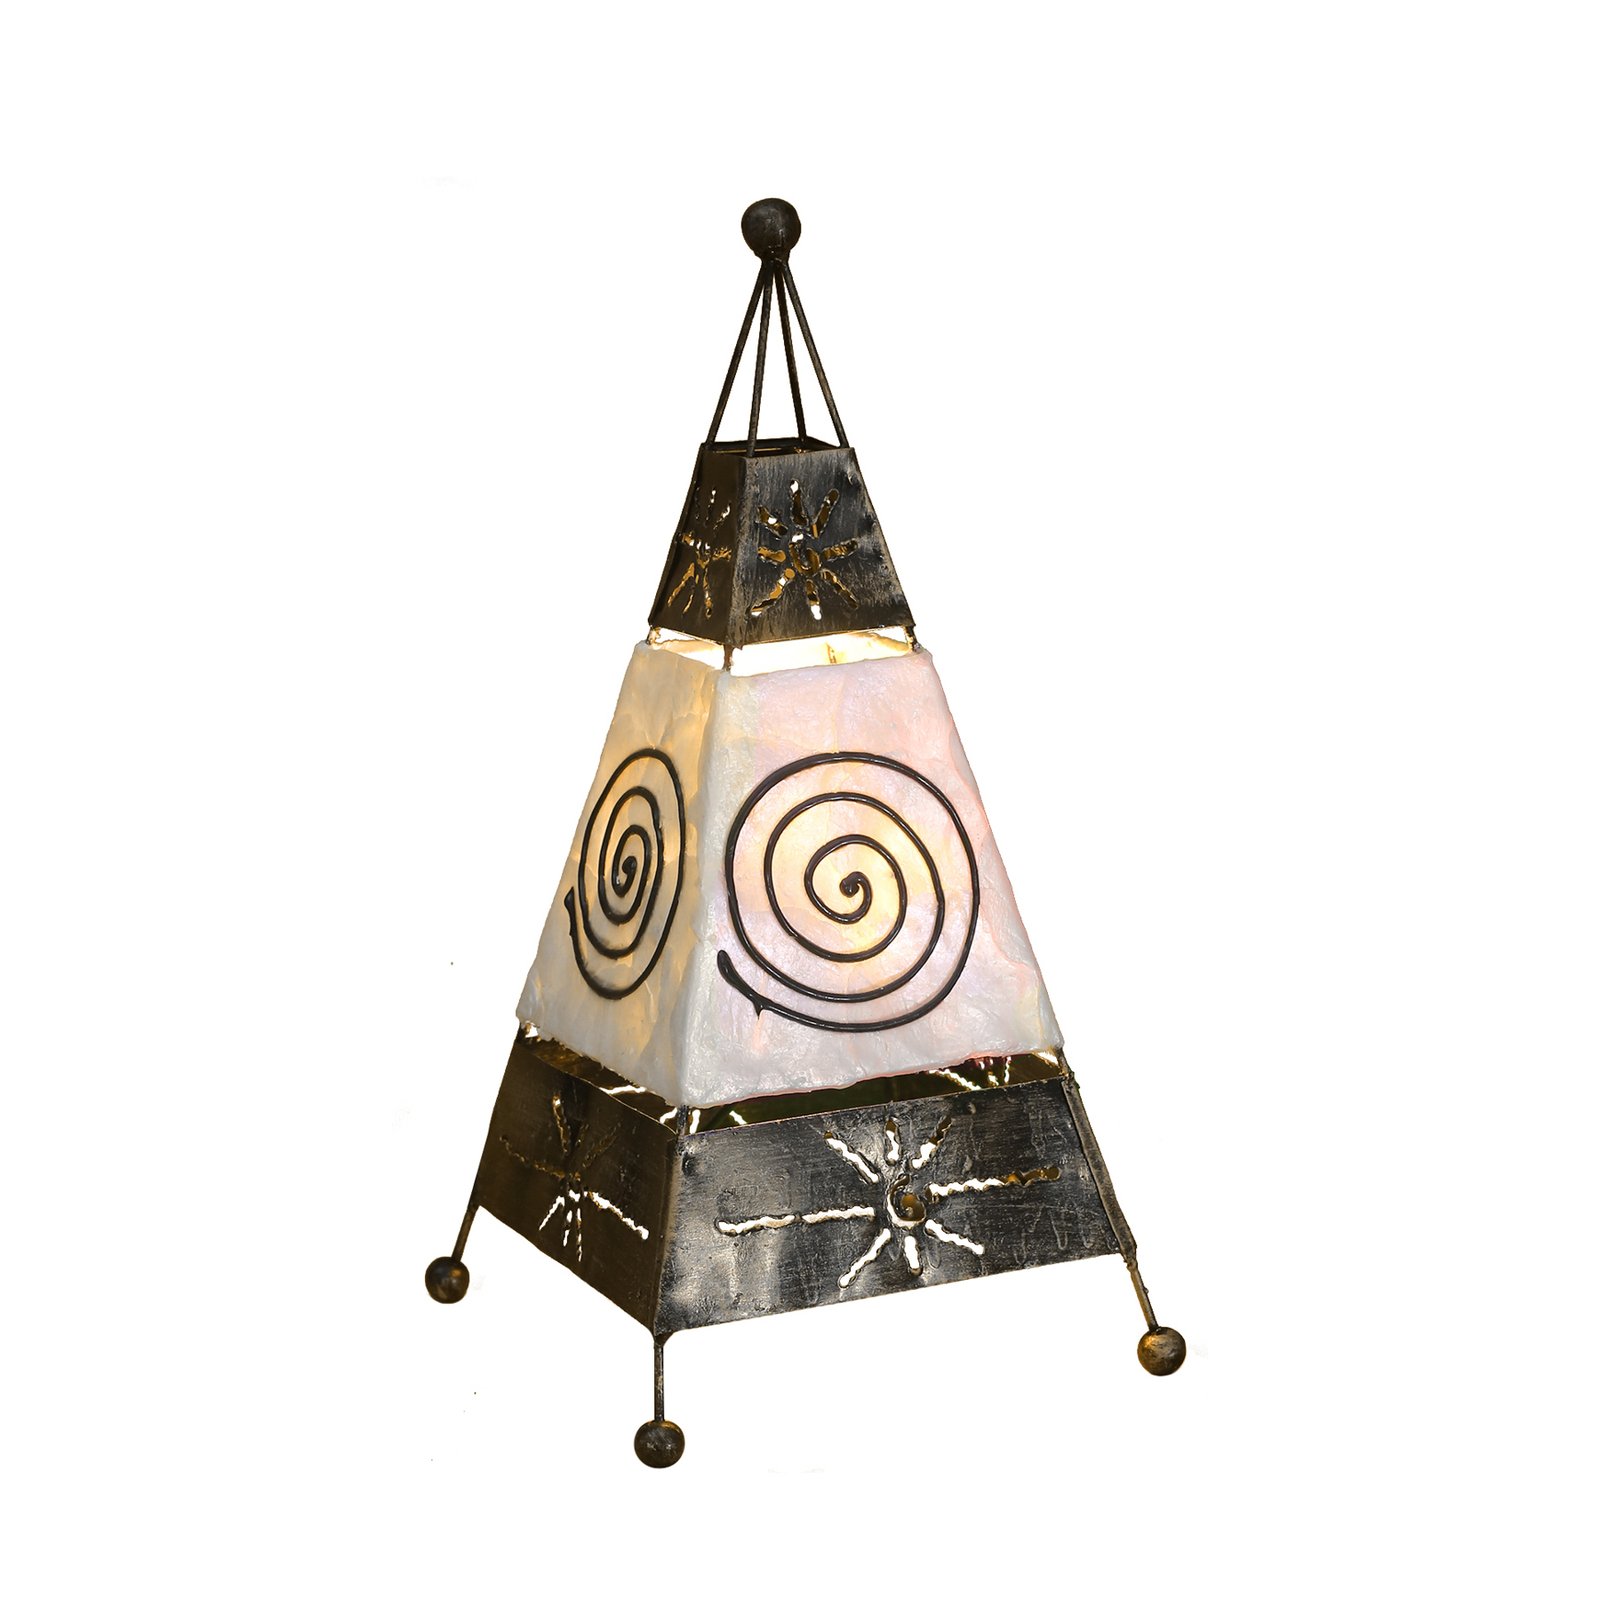 Carlo table lamp with spiral and sun motif